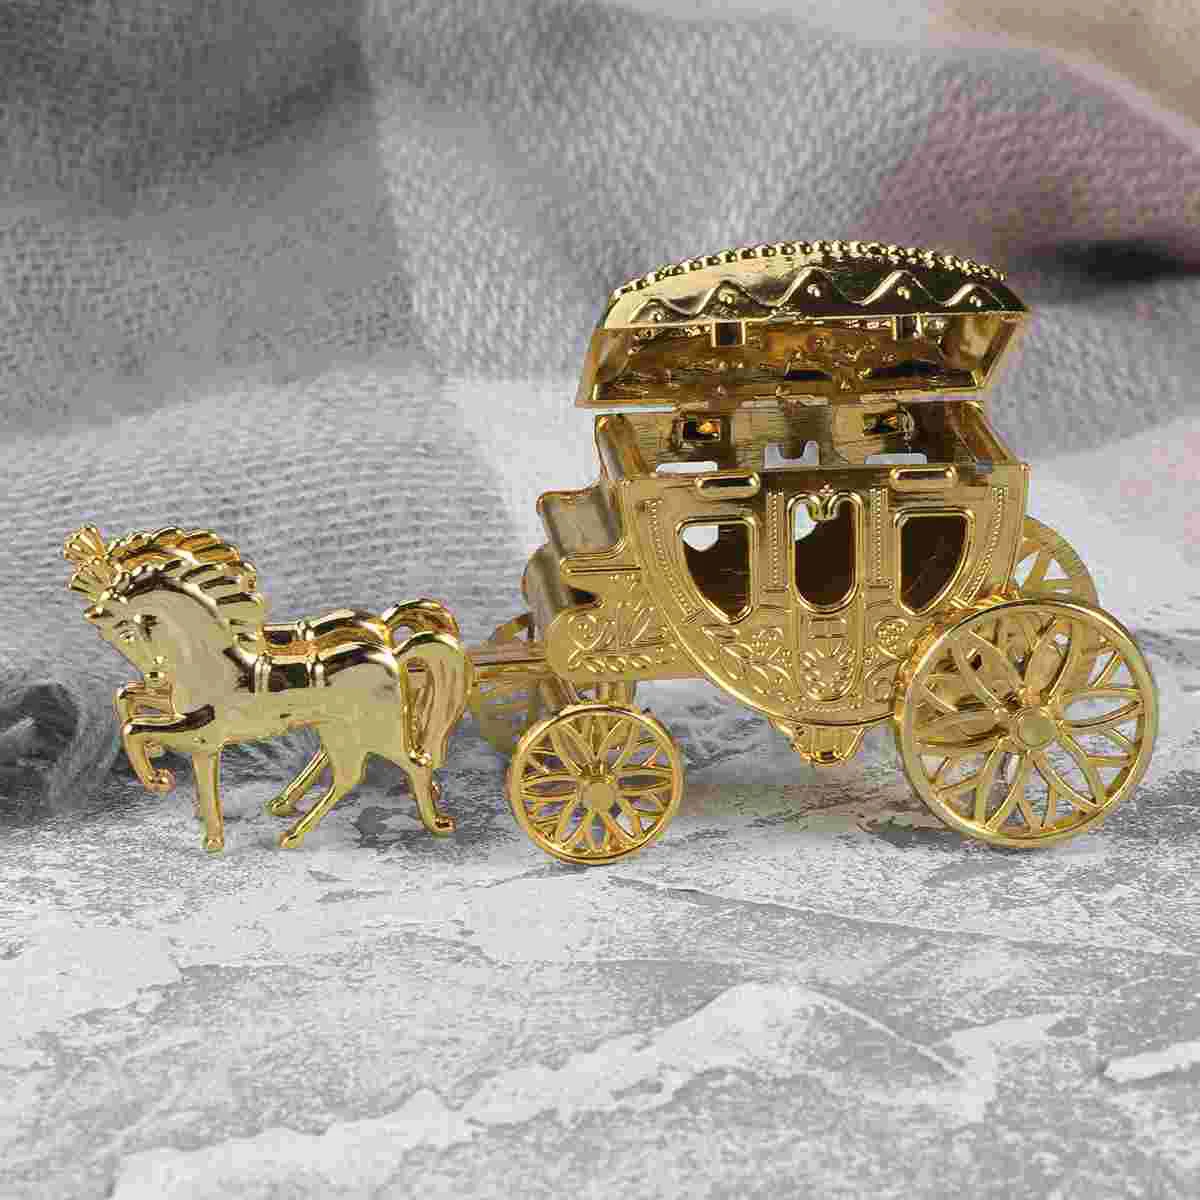 

carriage party supplies heart- shaped gift box favors gifts- Candy Box Carriage Pattern Candy Boxes Chocolate Boxes- Favors for